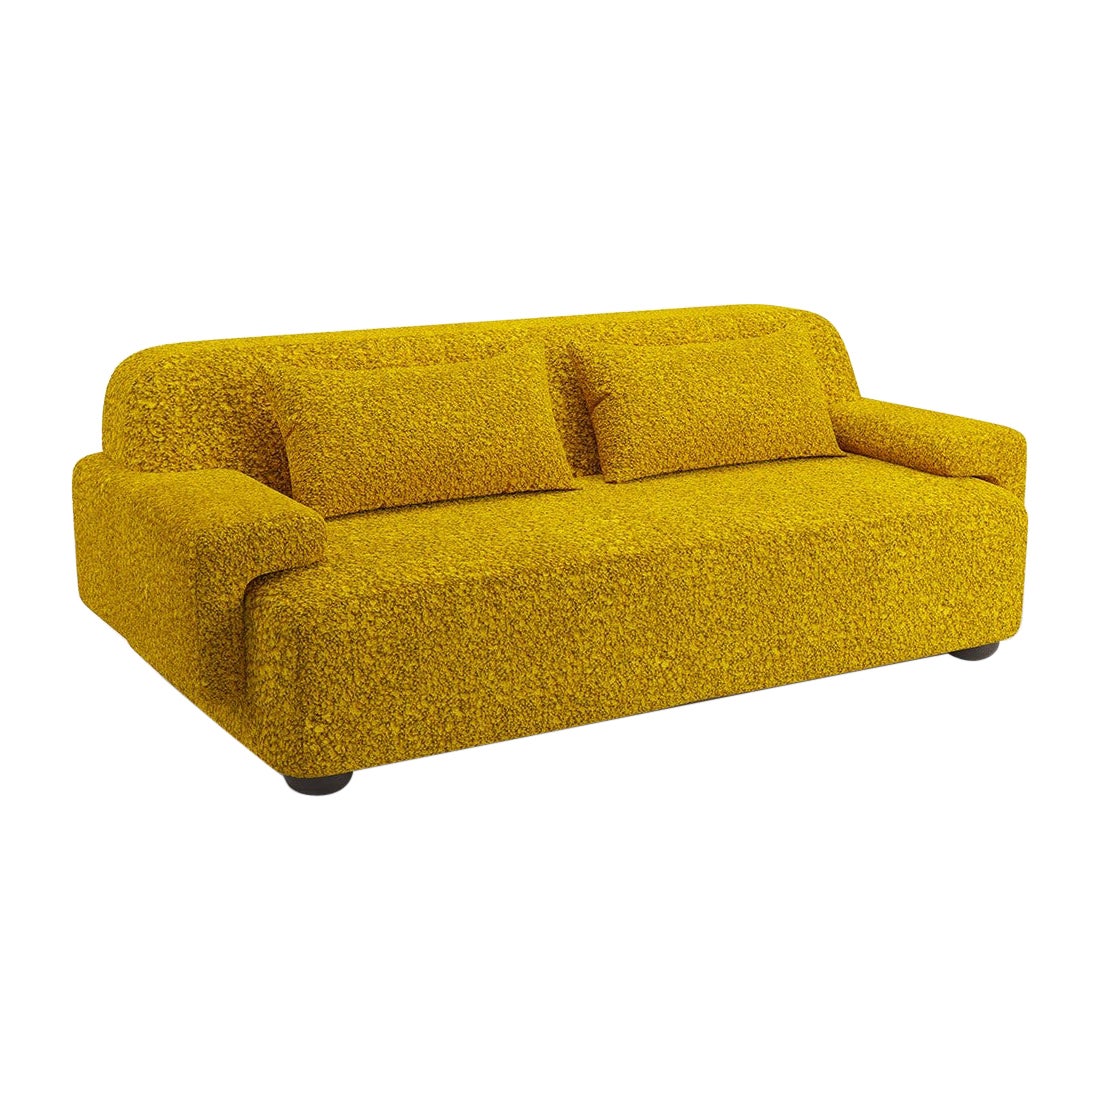 Popus Editions Lena 2.5 Seater Sofa in Amber Athena Loop Yarn Upholstery For Sale